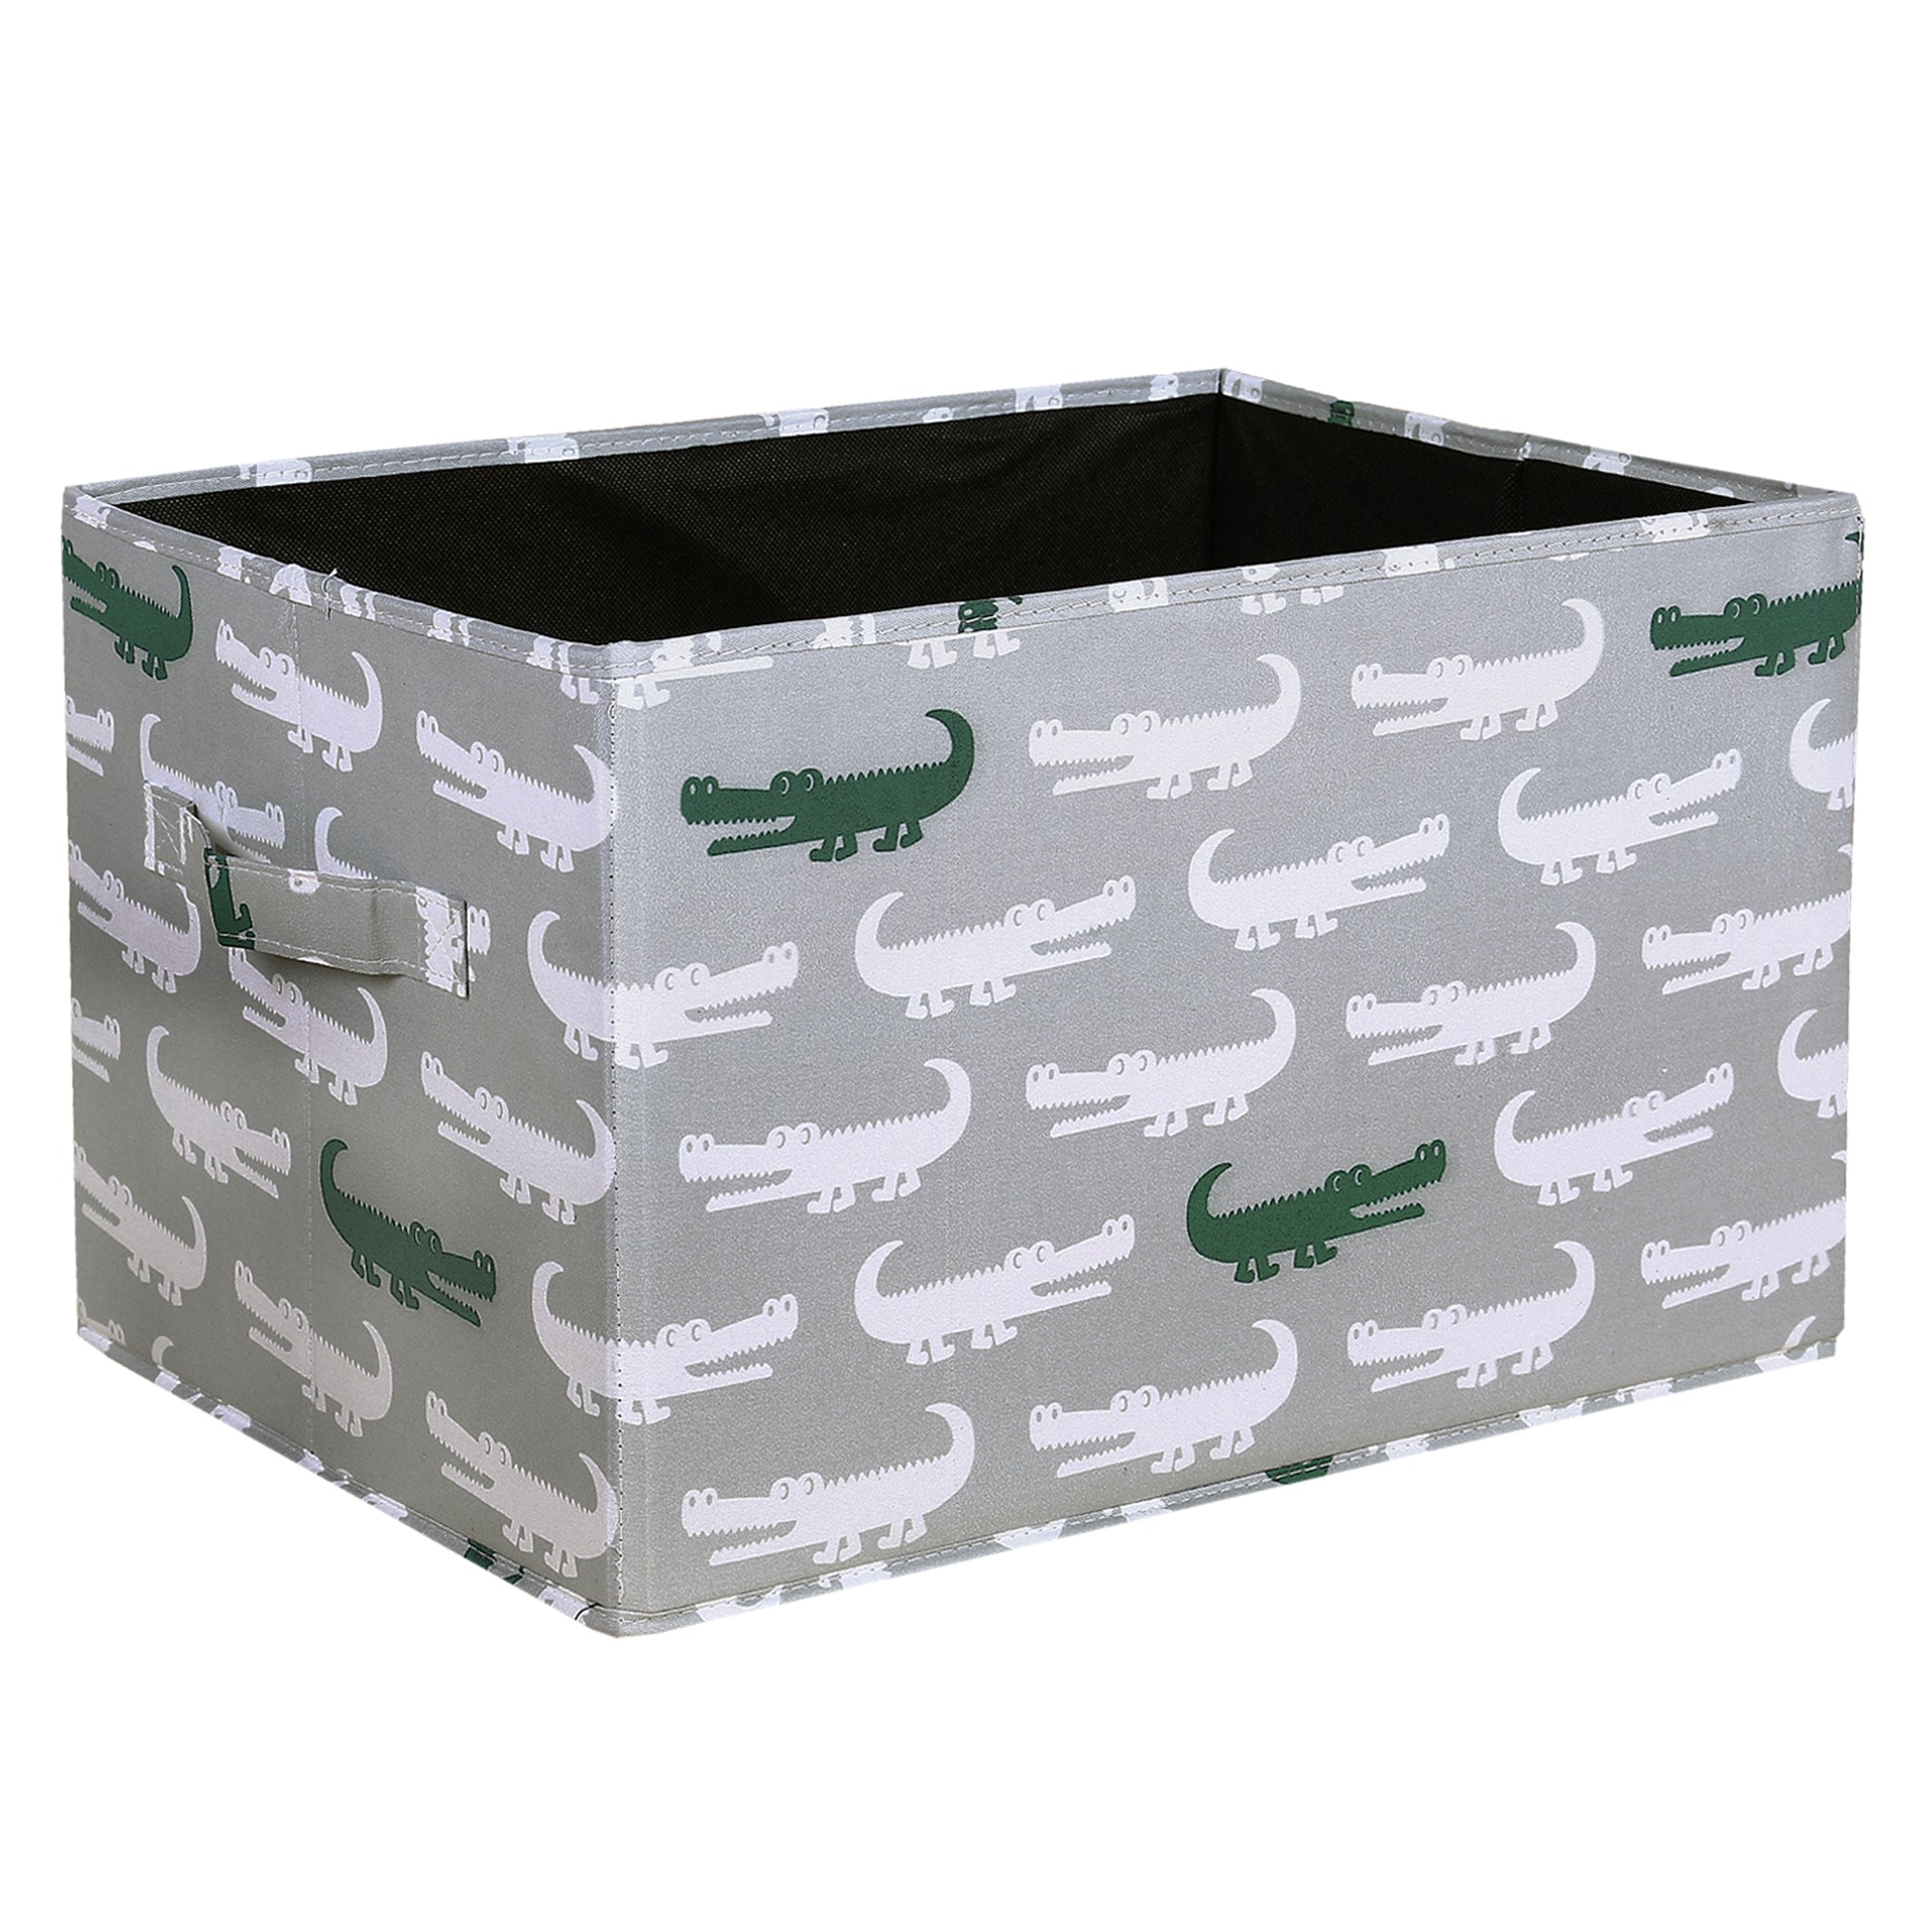 Alligator Fabric Covered Collapsible Box Gray & Green 3Pc Set